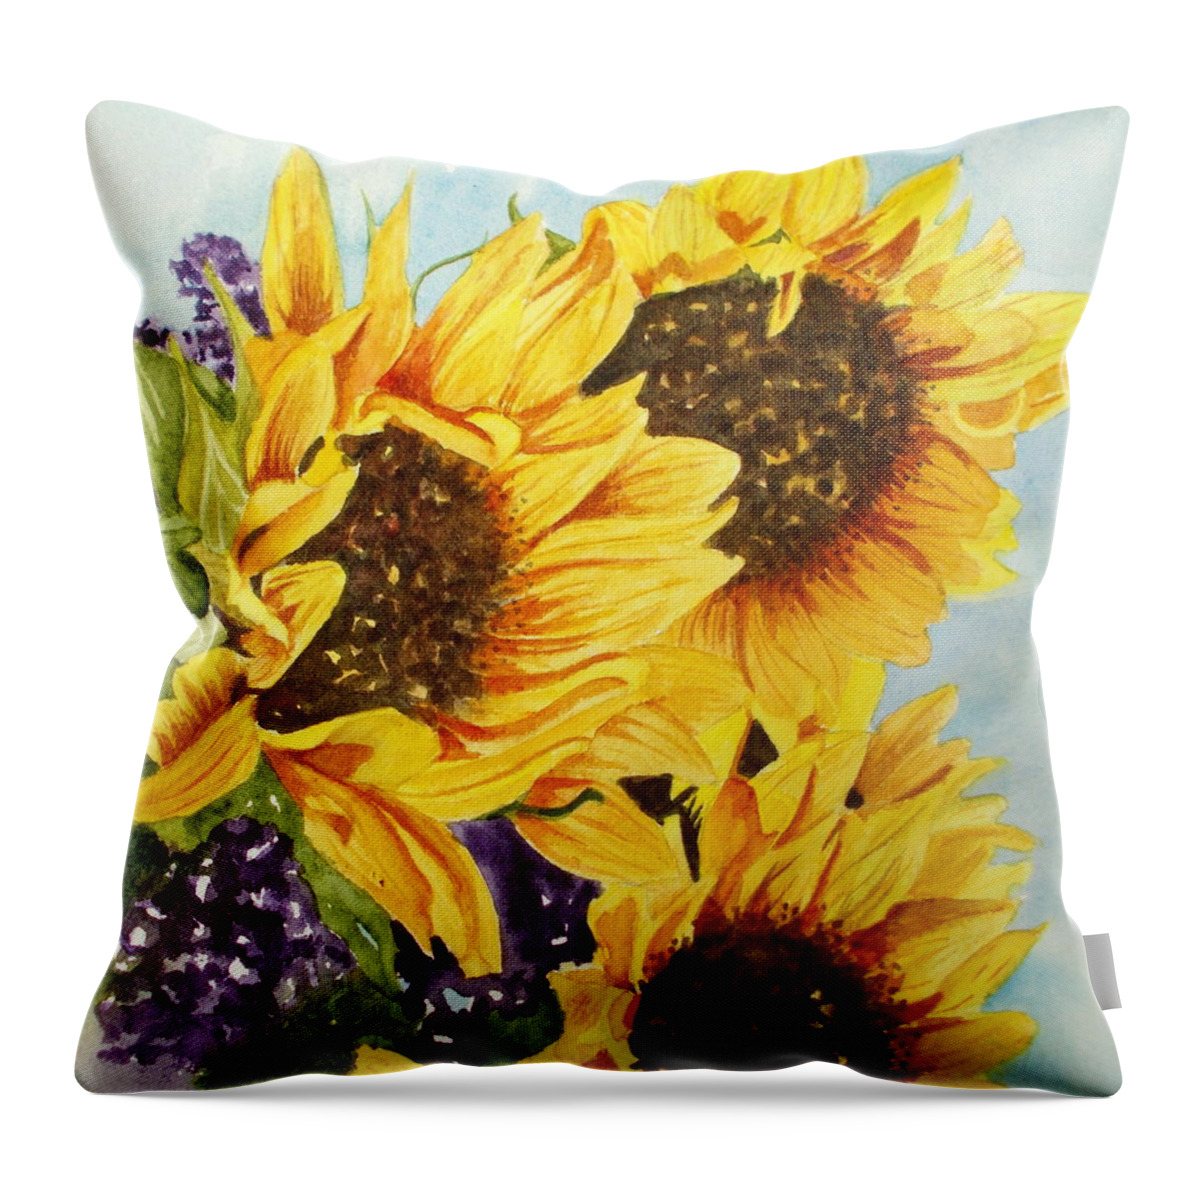 Still Life Throw Pillow featuring the painting Summer Bouquet by Nicole Curreri